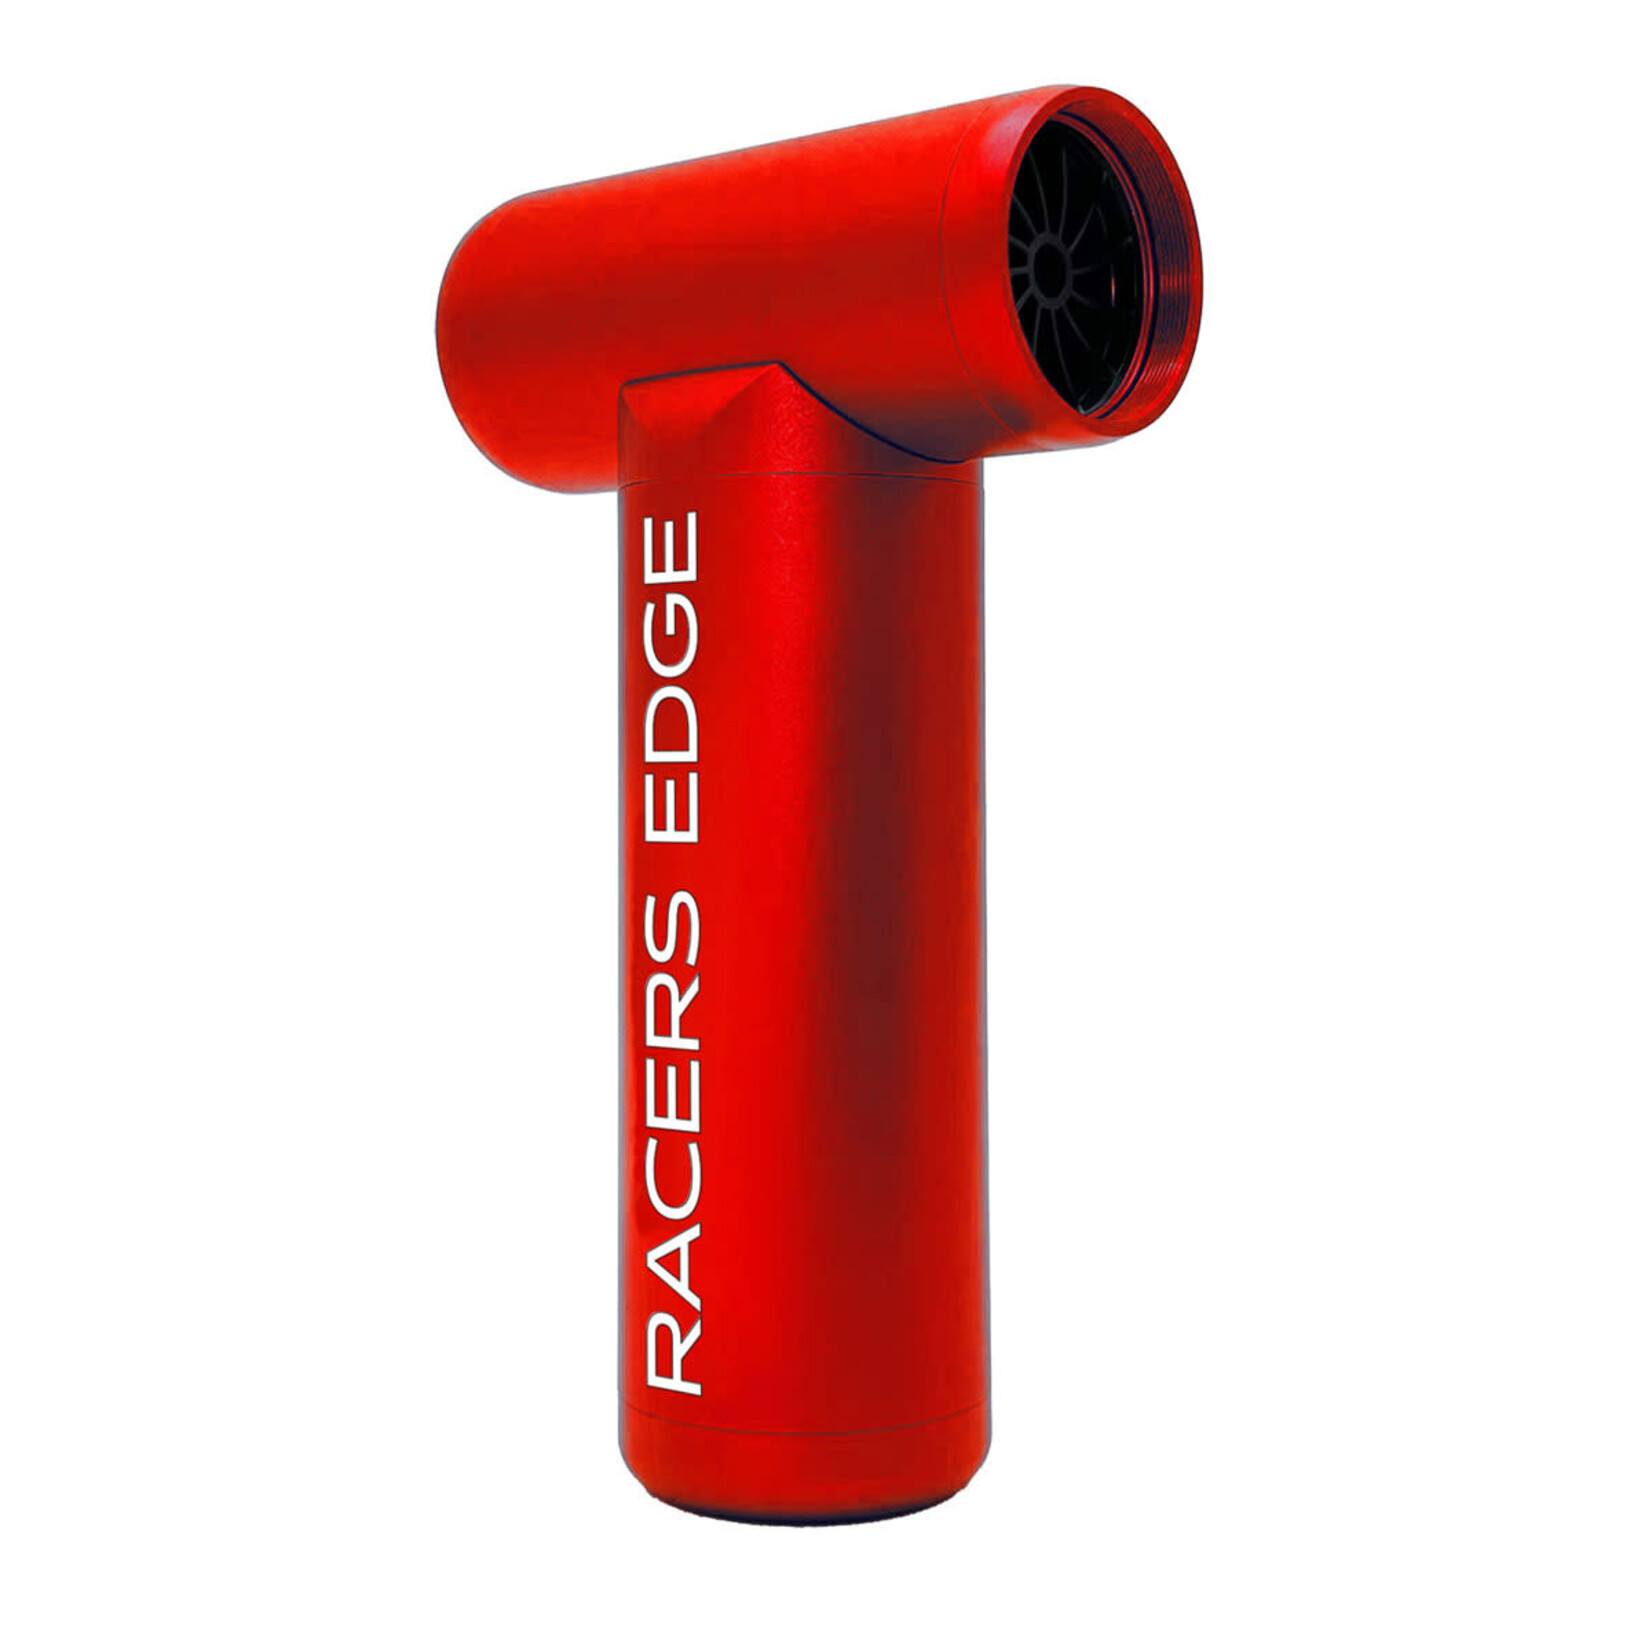 Racers Edge Racers Edge Pro Portable Power Duster (Red) #RCE7045R